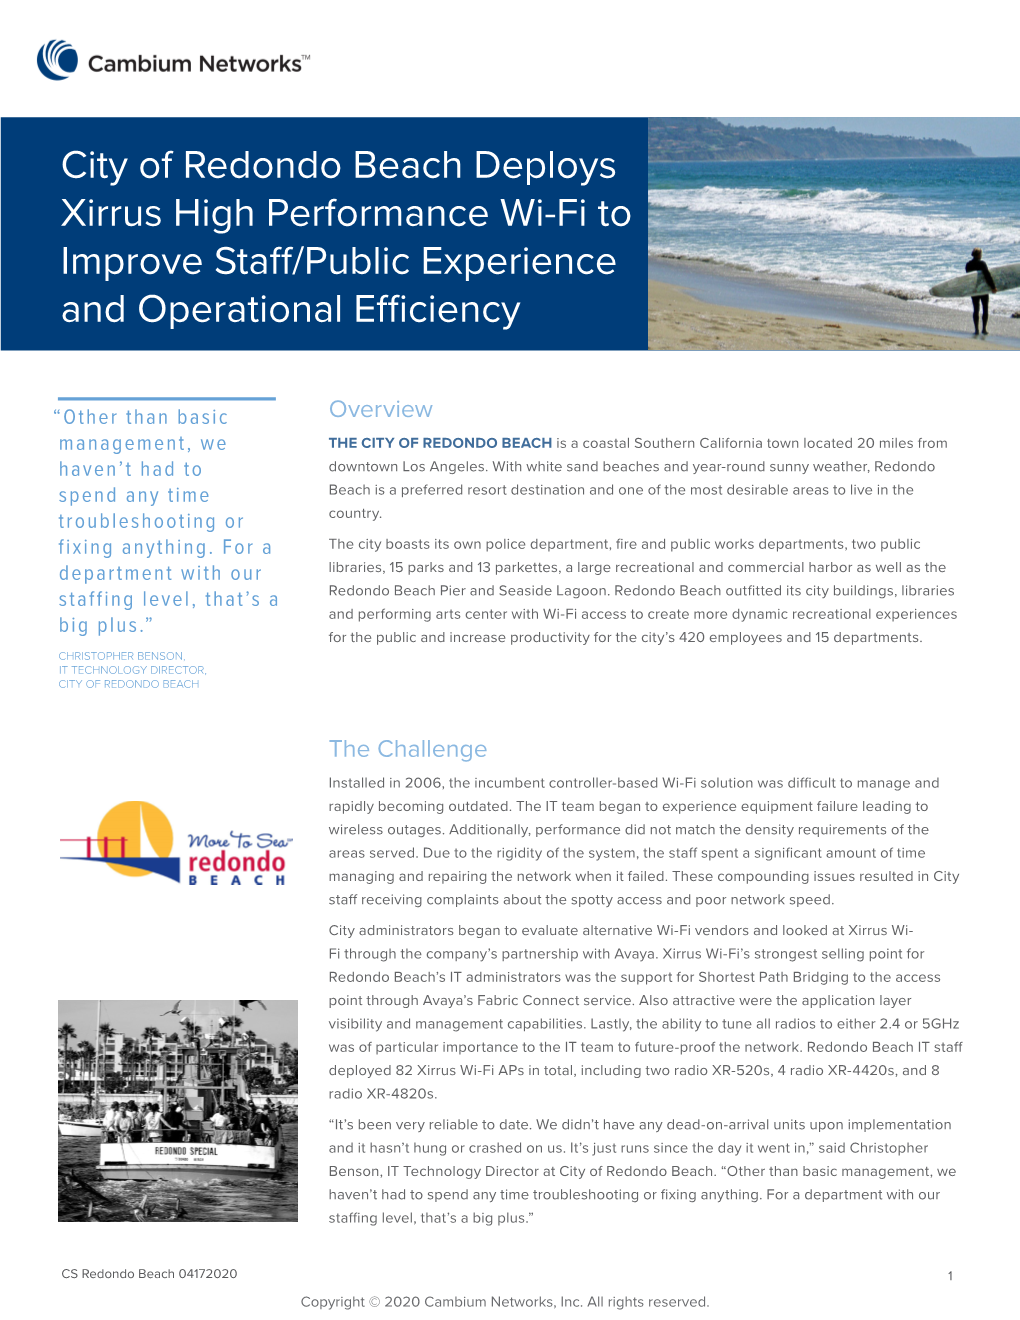 City of Redondo Beach Deploys Xirrus High Performance Wi-Fi to Improve Staff/Public Experience and Operational Efficiency